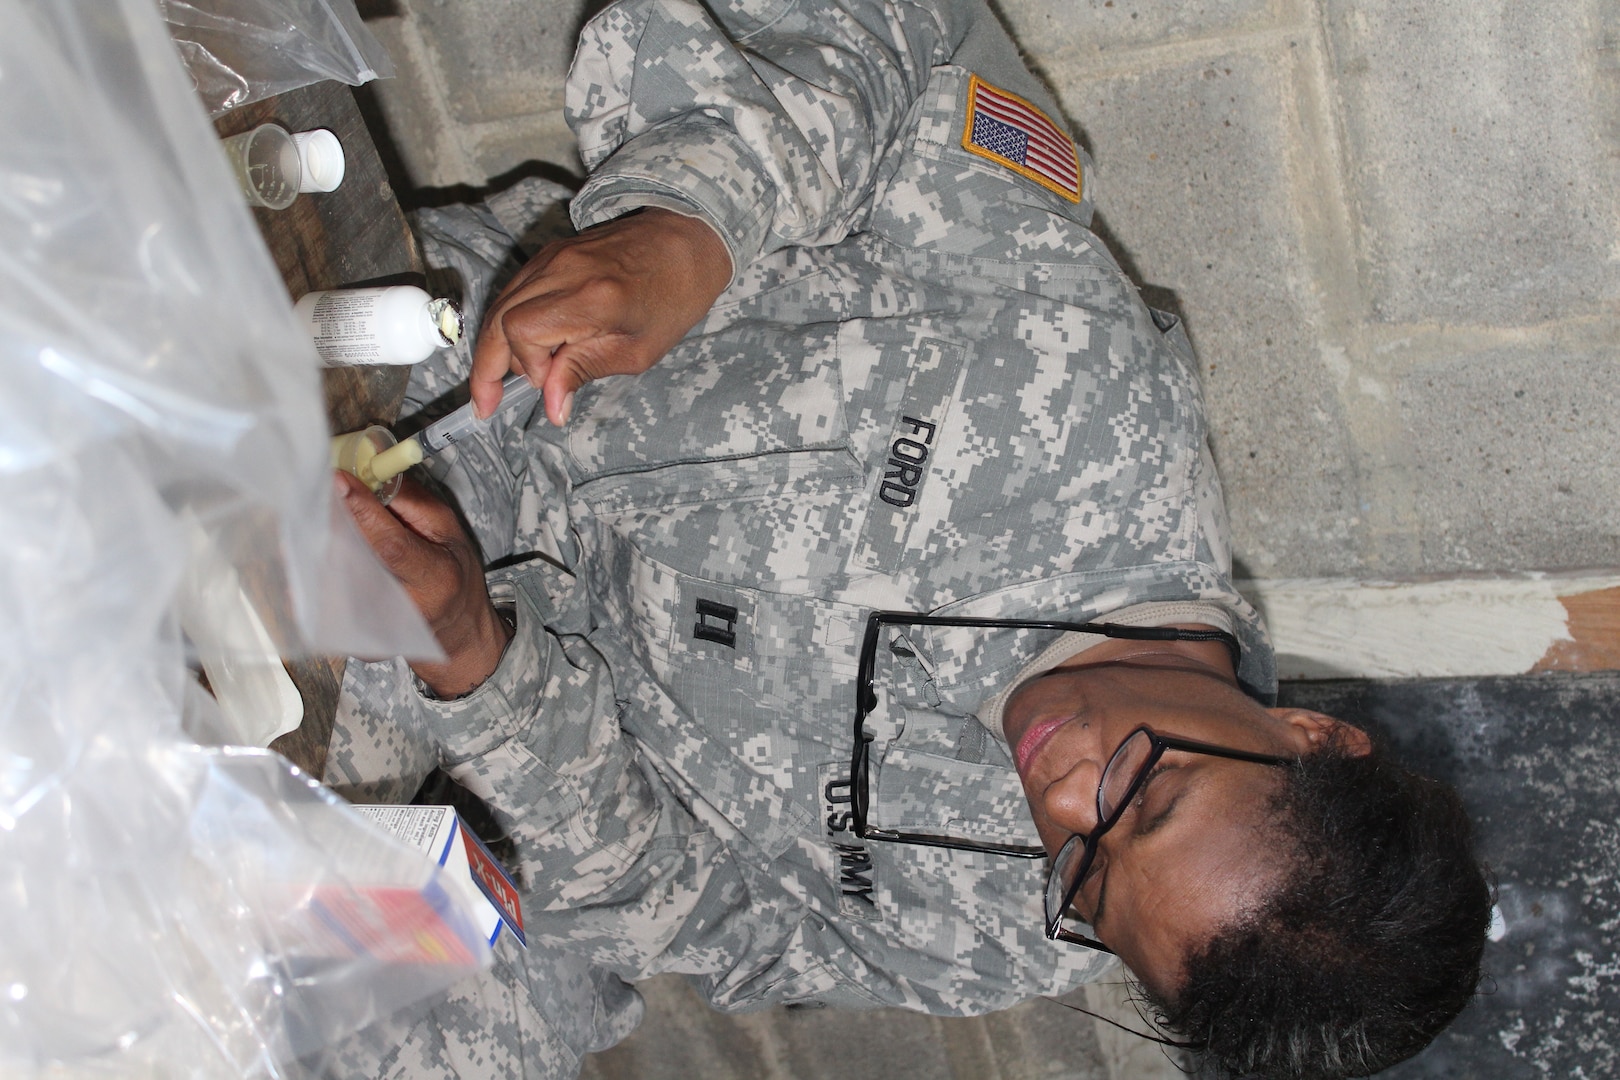 U.S. Army Captain Marshon Ford, Joint Task Force-Bravo Medical Element nurse, prepares de-worming medication for children during a Medical Readiness Training Exercise in Nueva Jerusalén, Gracias a Dios Department, Honduras, Jan. 28, 2016. The medication is one of many services the MEDRETE provides to patients, including, a basic health class from Honduran military representatives and dental services, to name a few. (U.S. Army photo by Maria Pinel/Released)